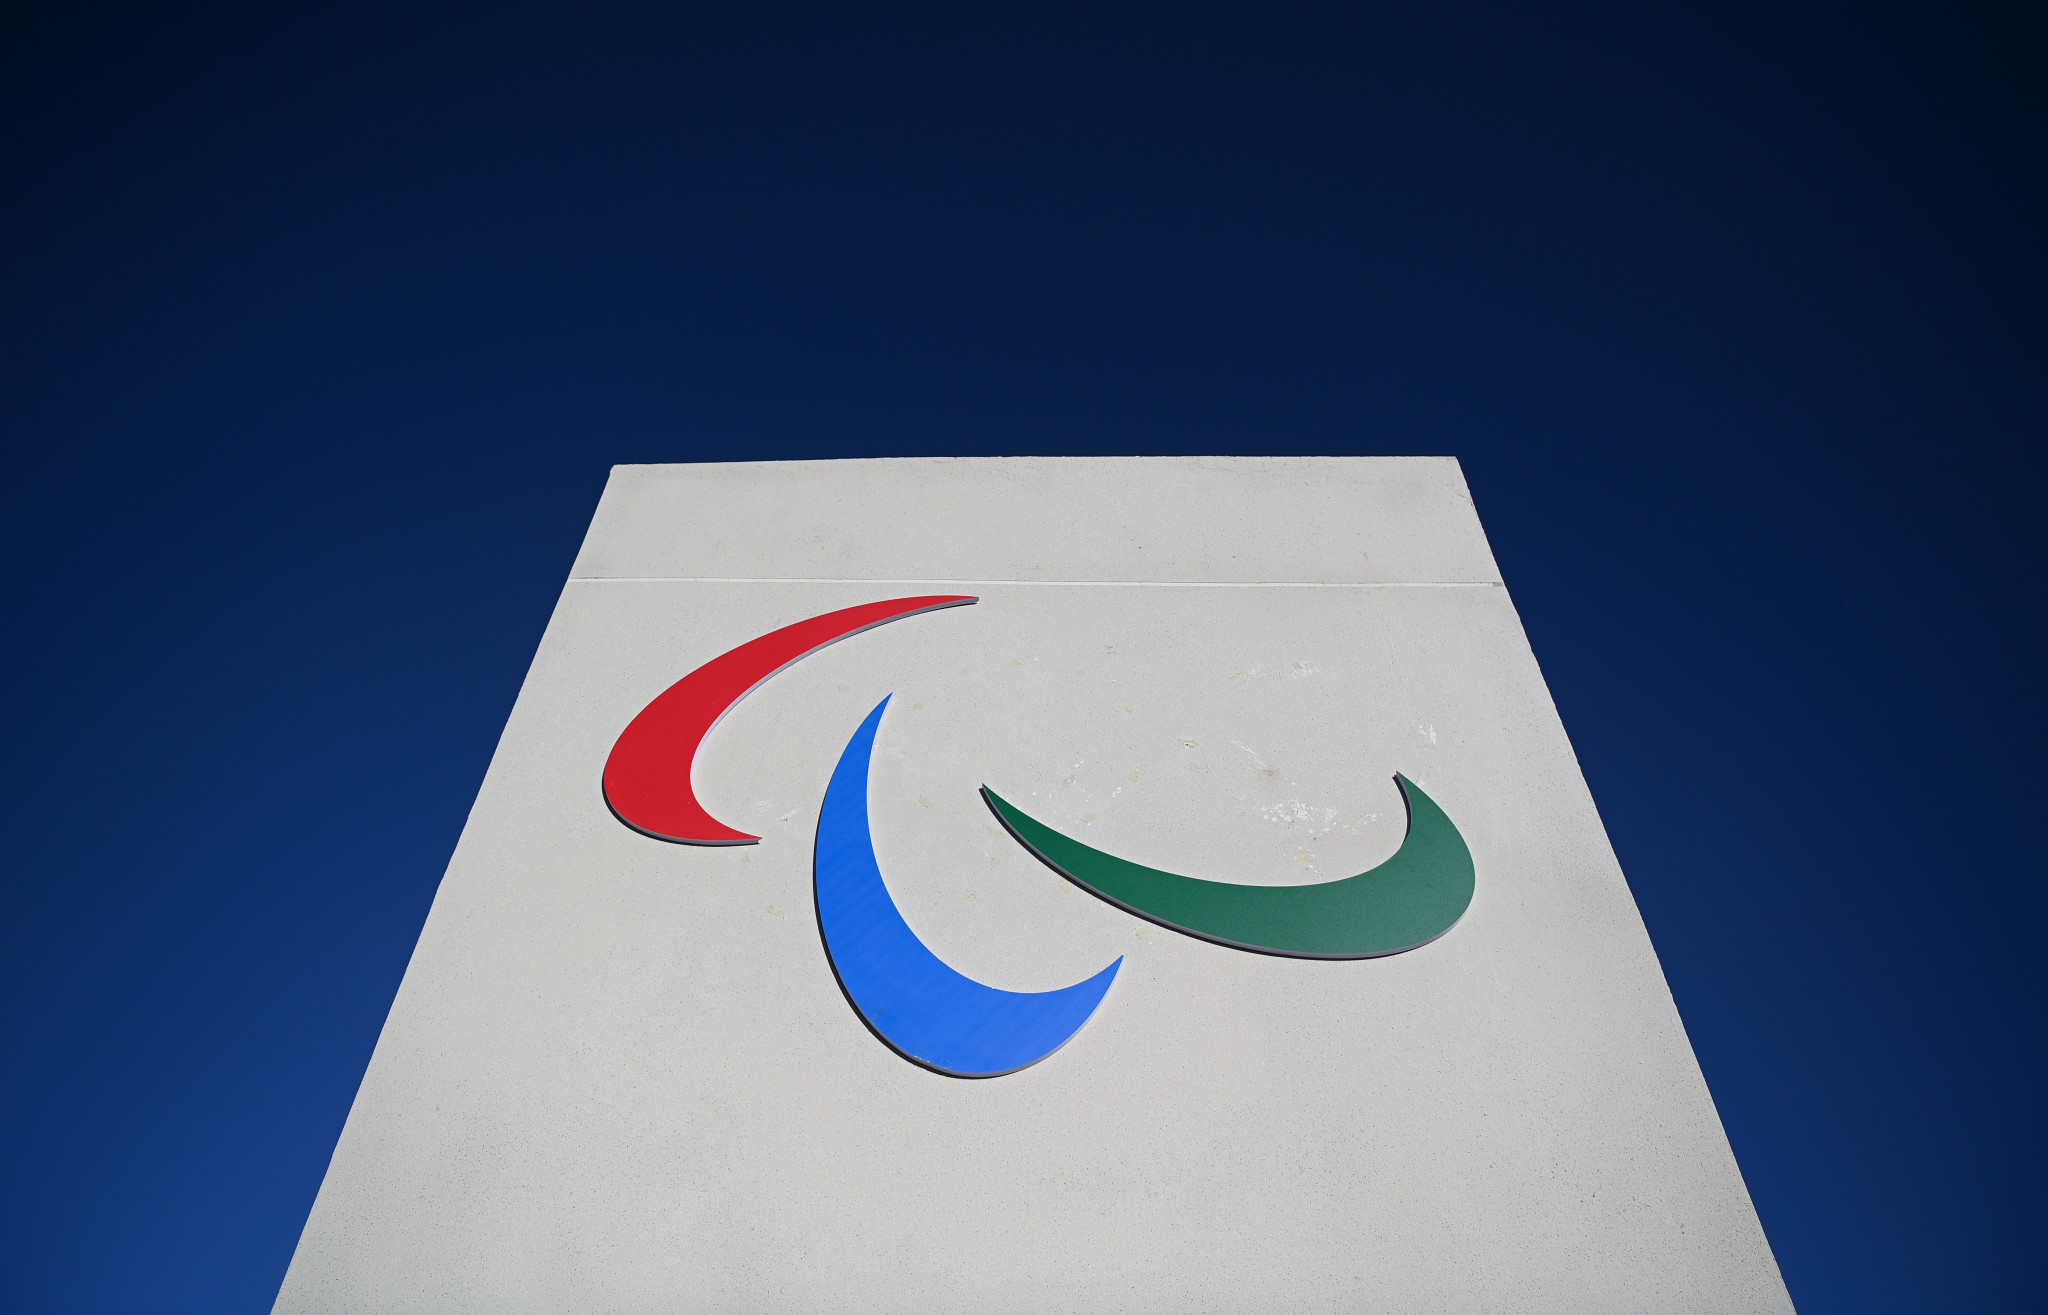 Russia and Belarus appeal against IPC suspension upheld on "technicality"